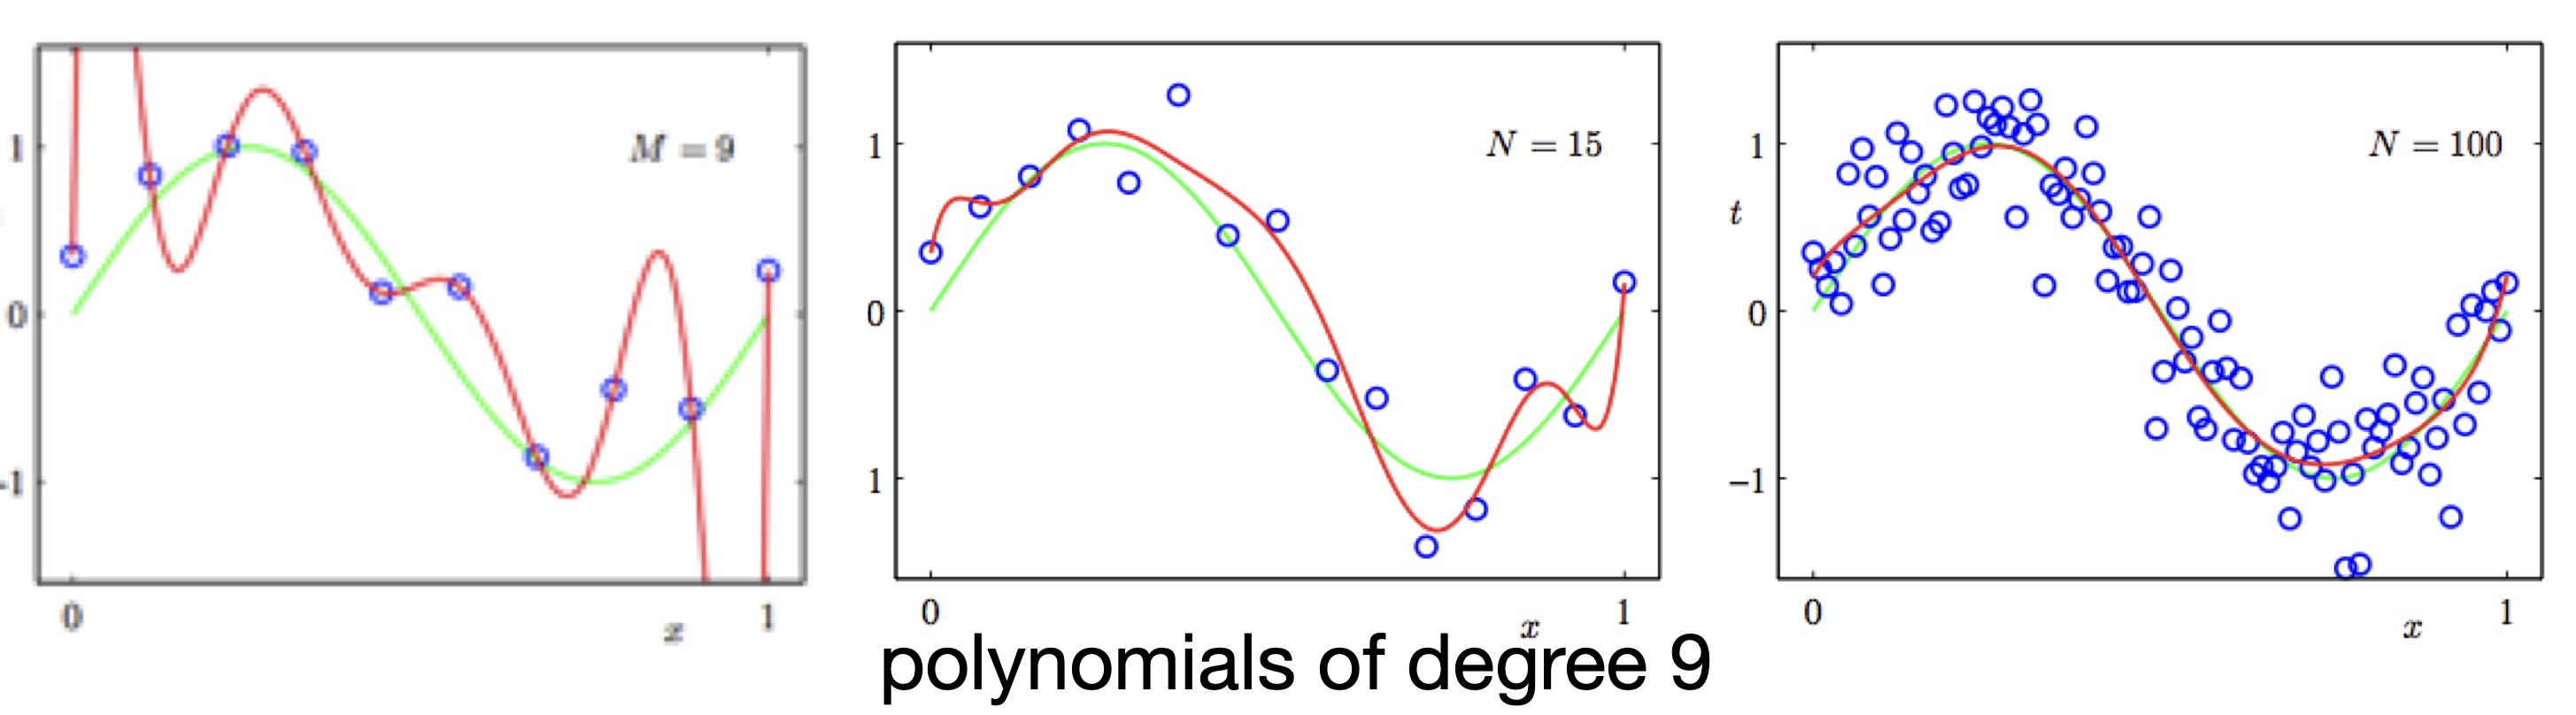 With more data, the previously overfitting model with a high degree of polynomial no longer overfits